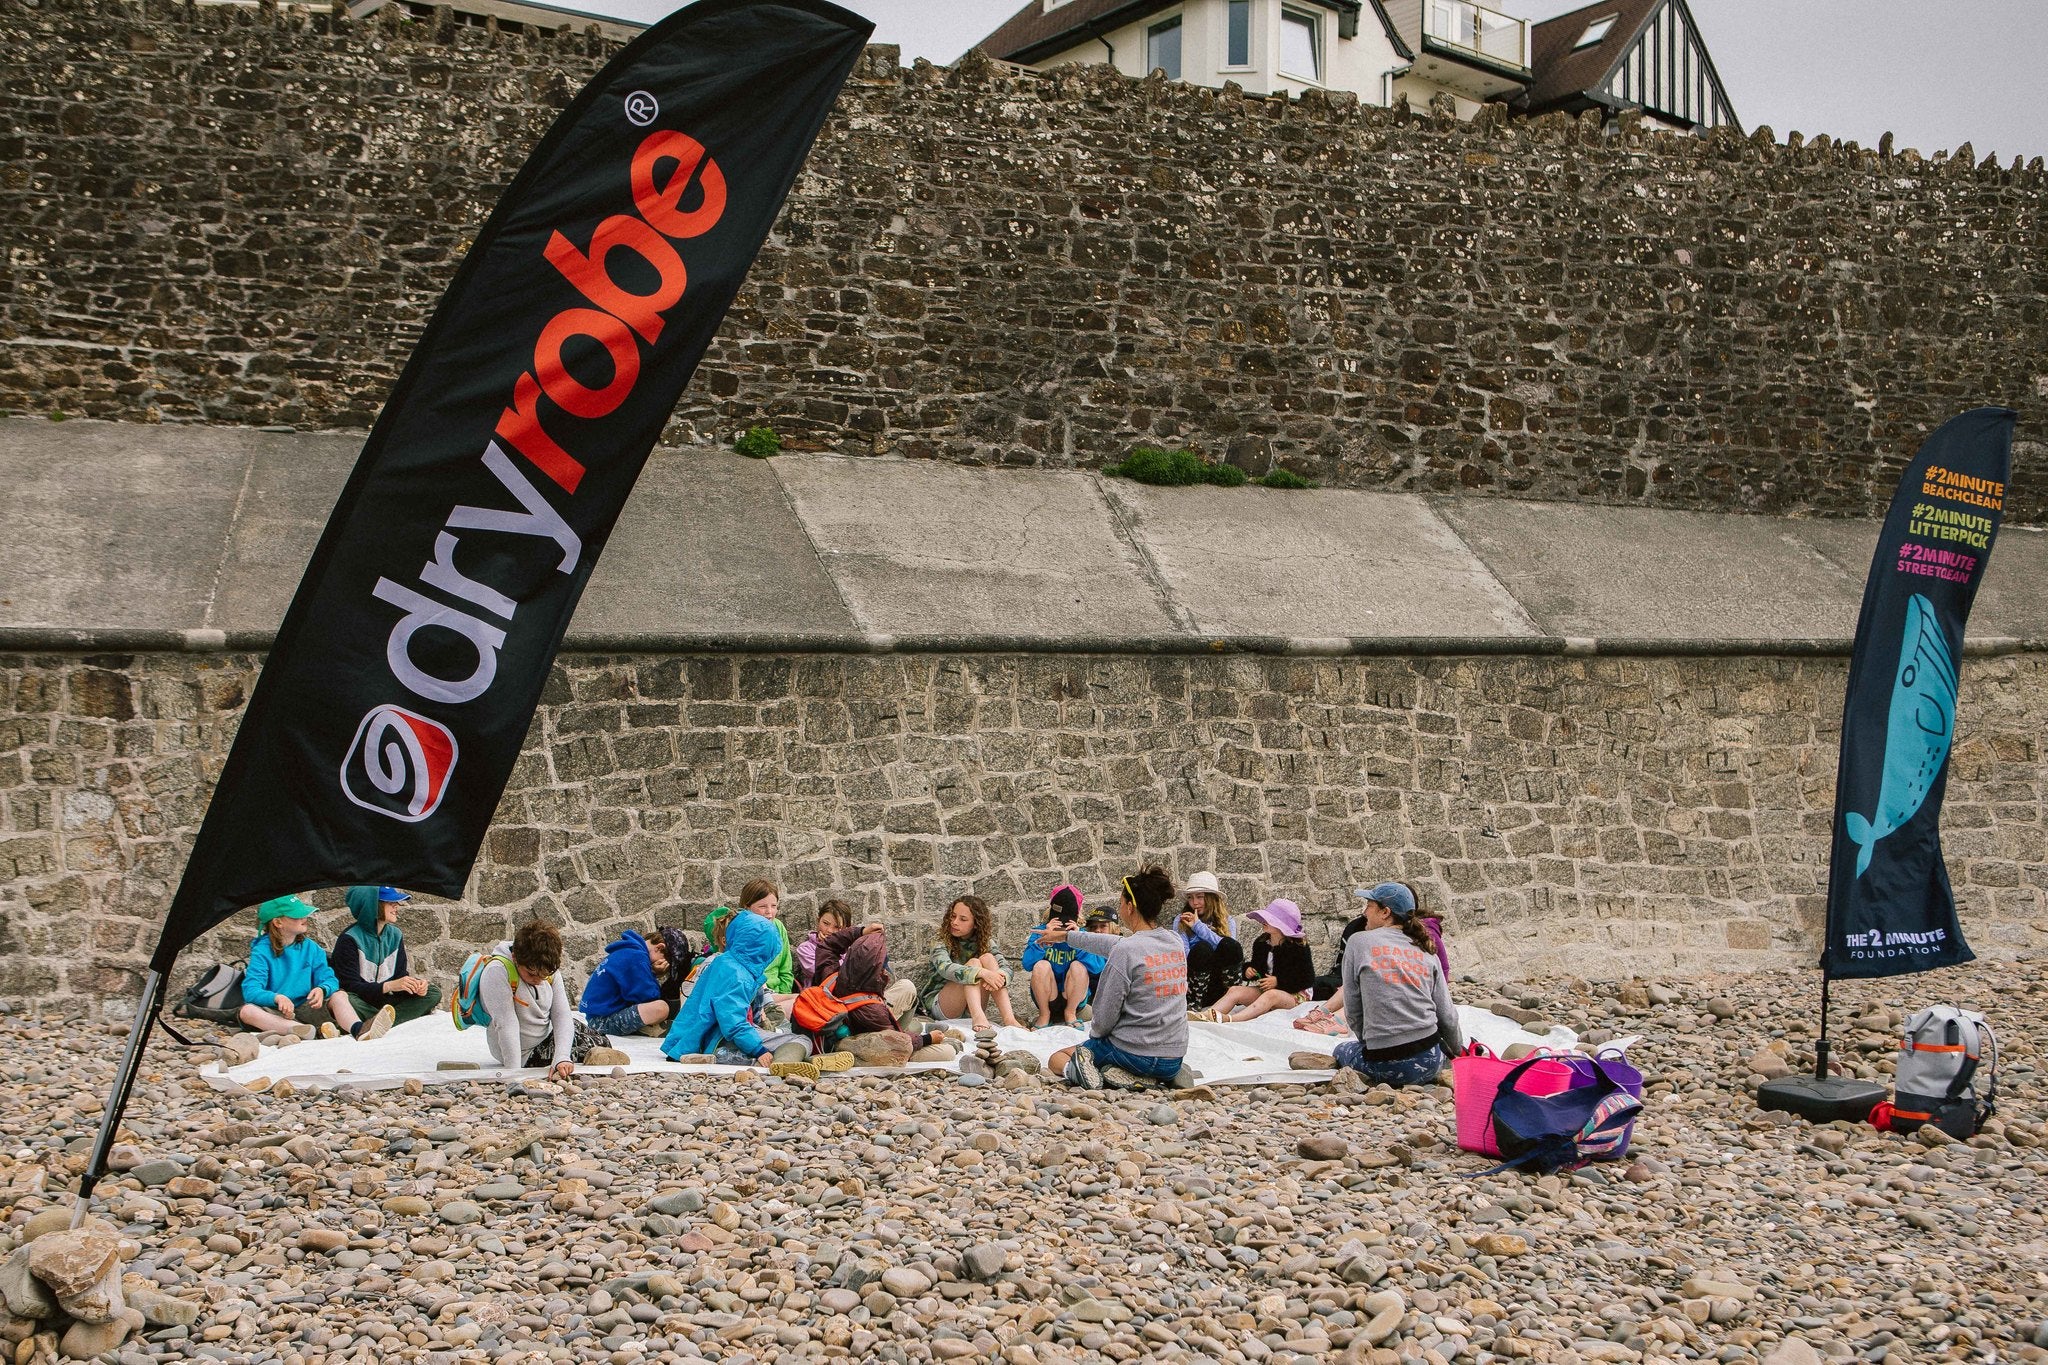 The 2 minute Beach School, supported by dryrobe®